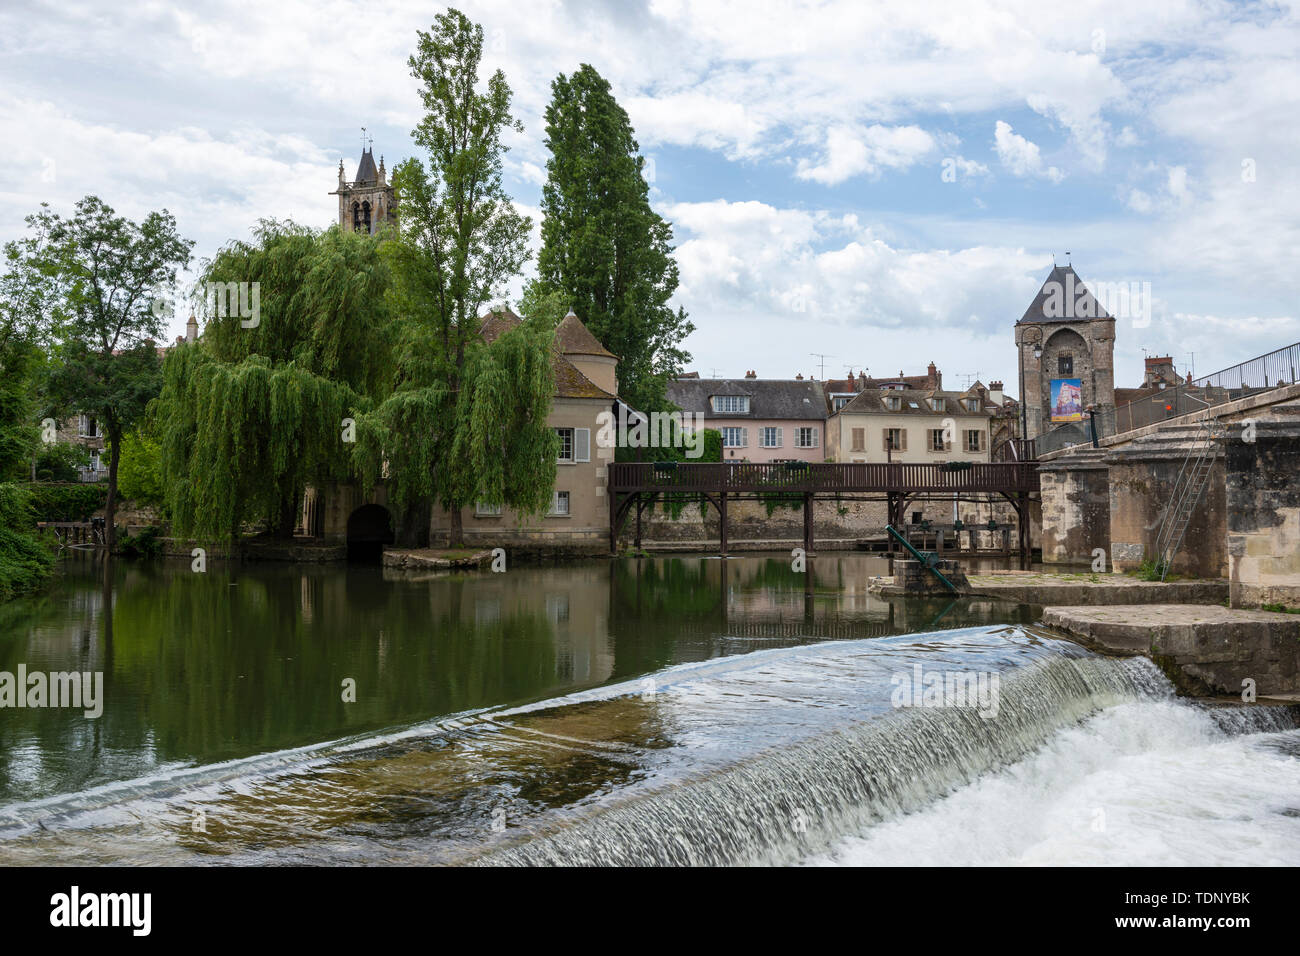 Weir on River Loing with Provencher Mill and Porte De Bourgogne in background, Moret-sur-Loing, Seine-et-Marne, Île-de-France region of France Stock Photo